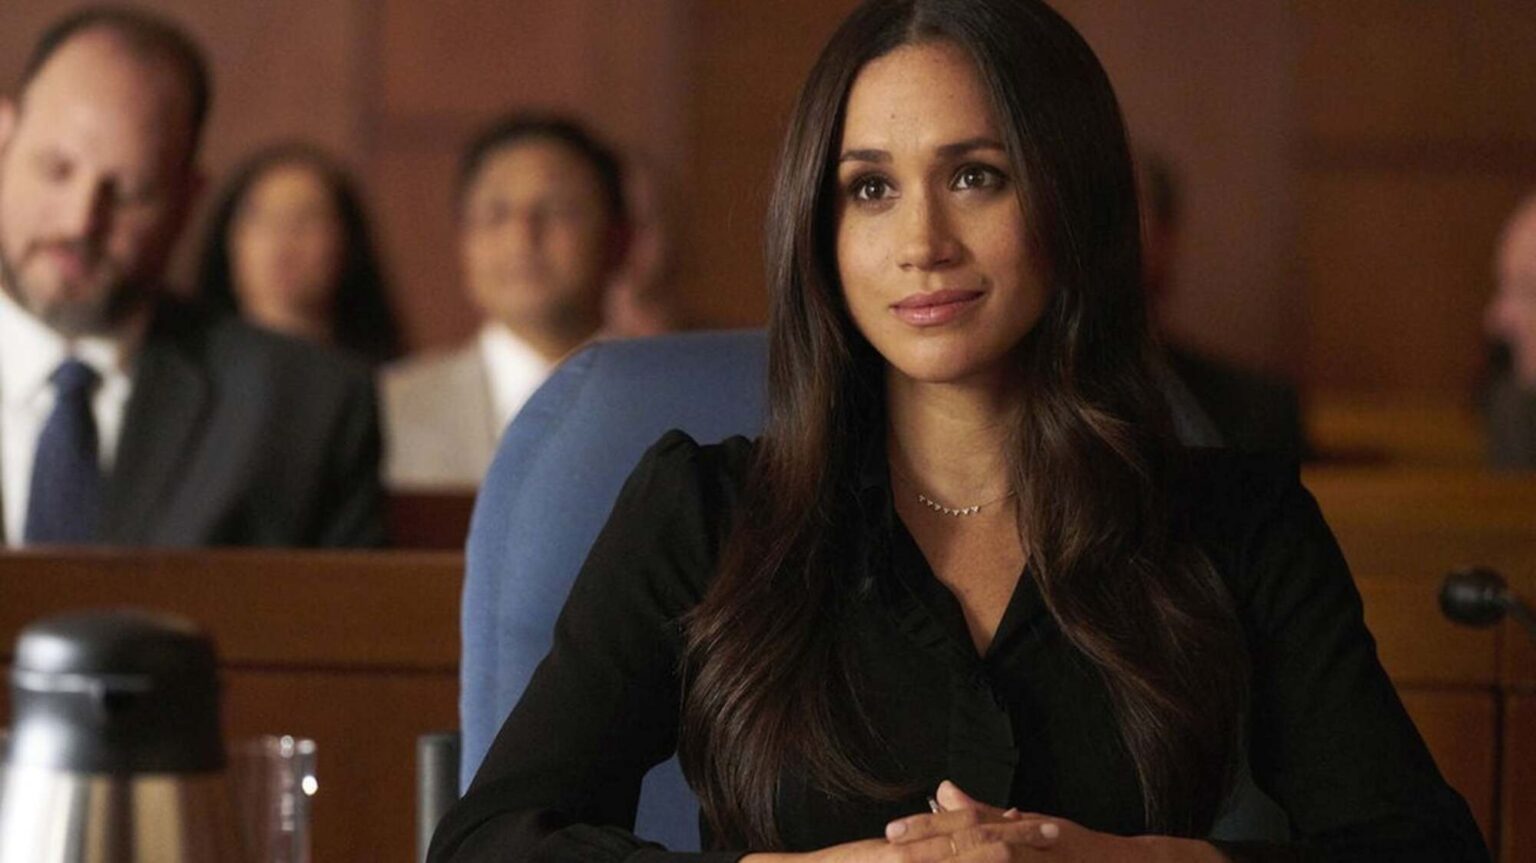 Do you love Meghan Markle? Learn more about the fantastic character she played on 'Suits' and how she was queen of the courtroom.